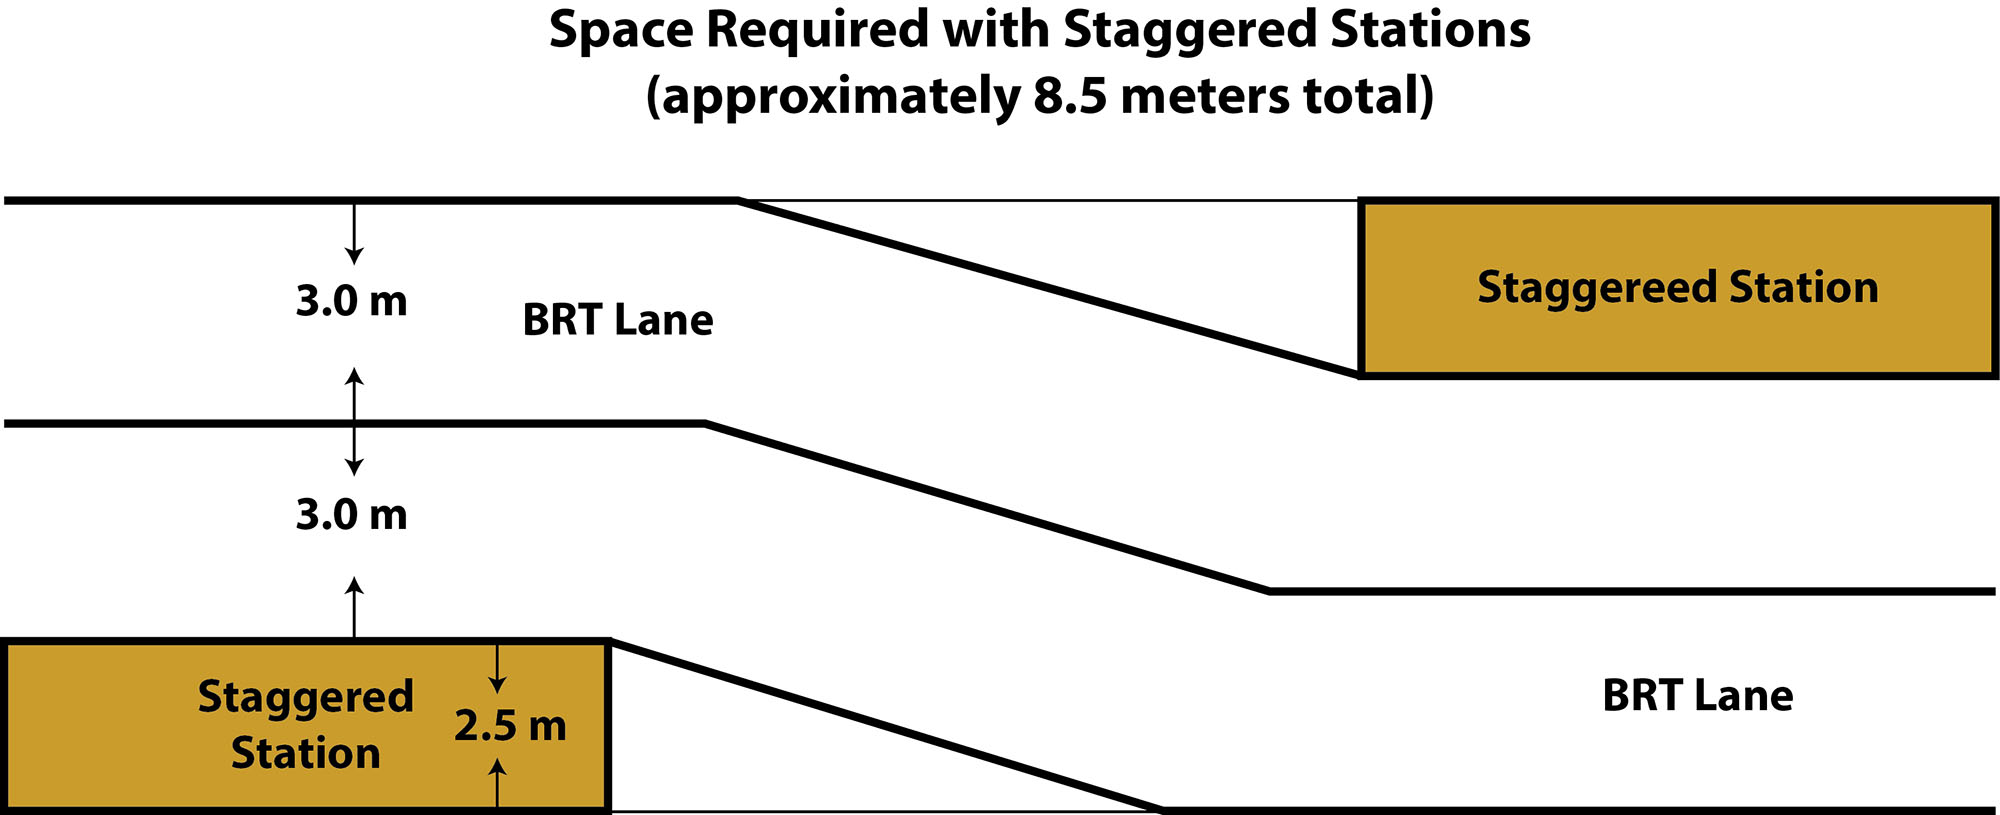 Fig. 22.64 Relative space requirements for roadway configurations with staggered stations.